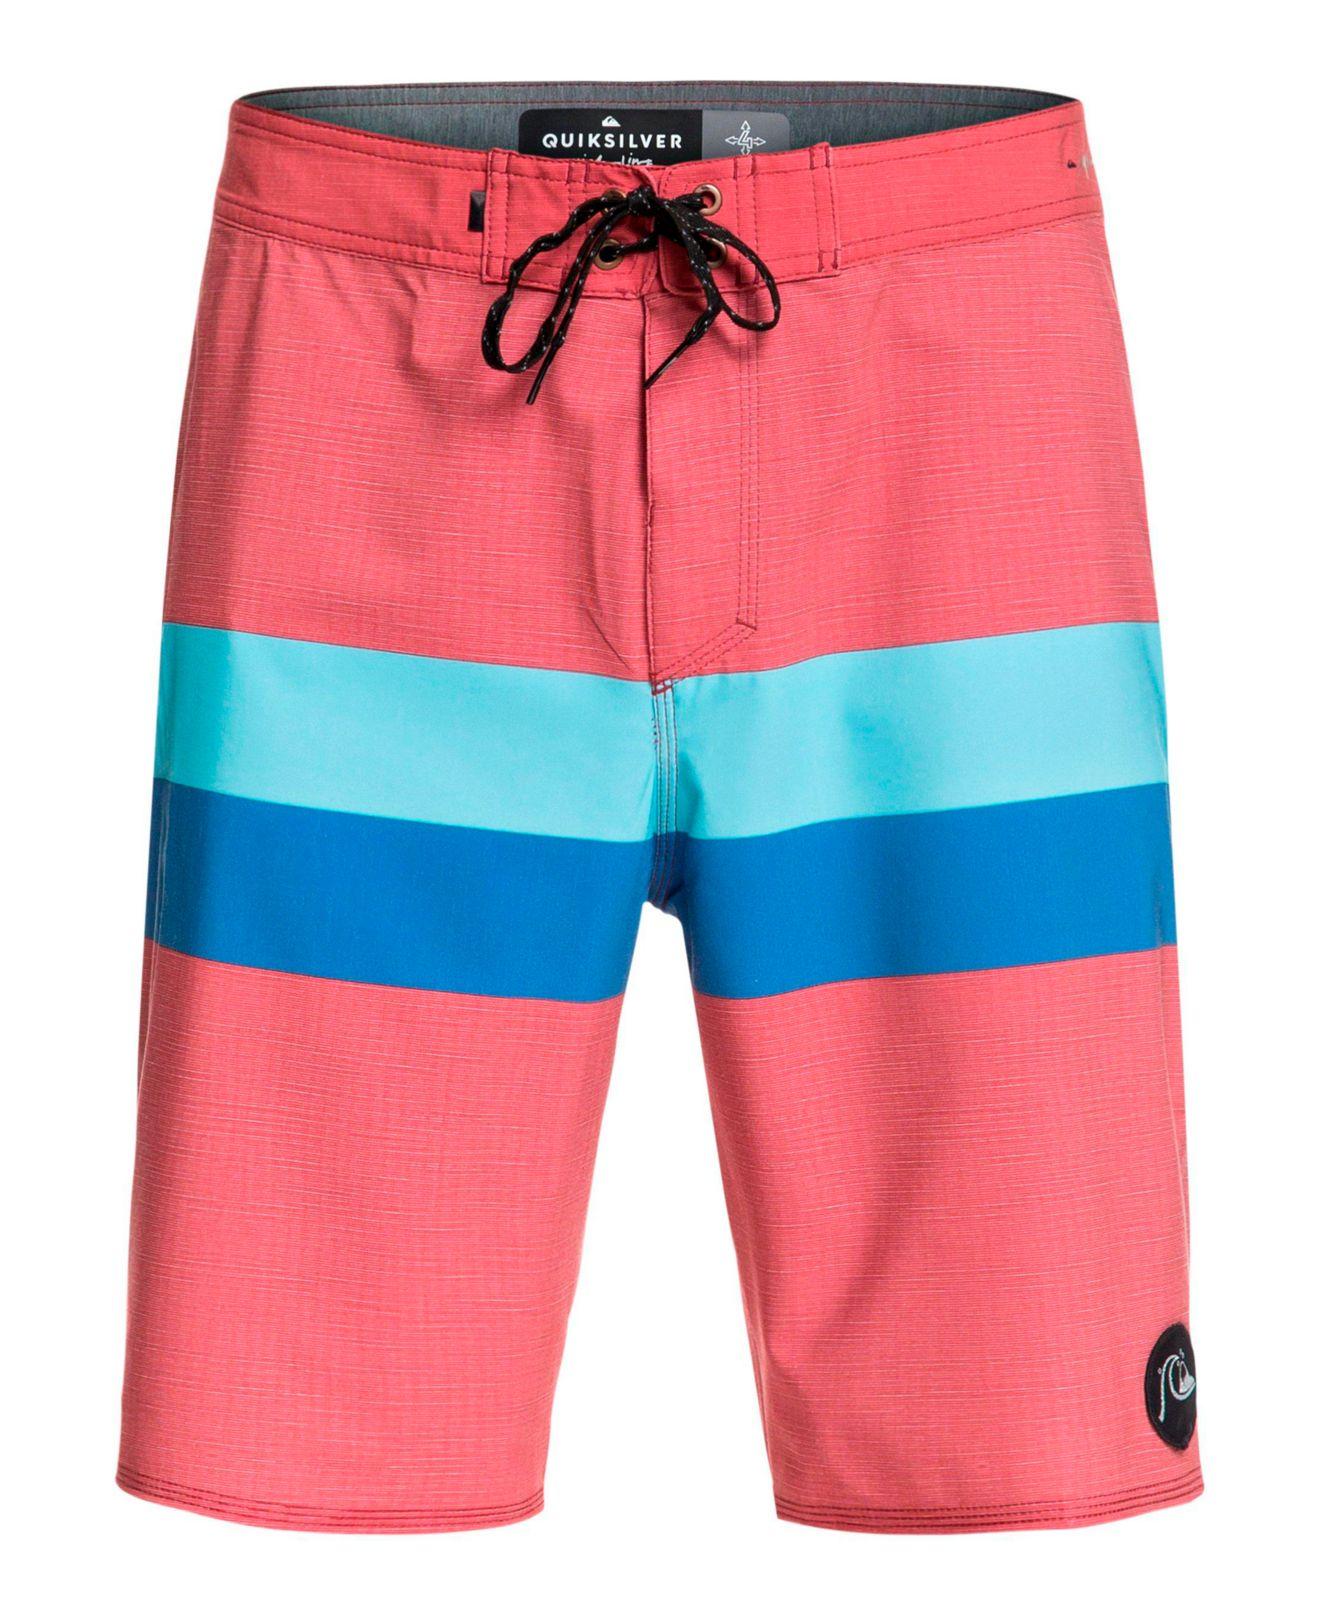 Quiksilver Board Shorts in Red for Men - Lyst